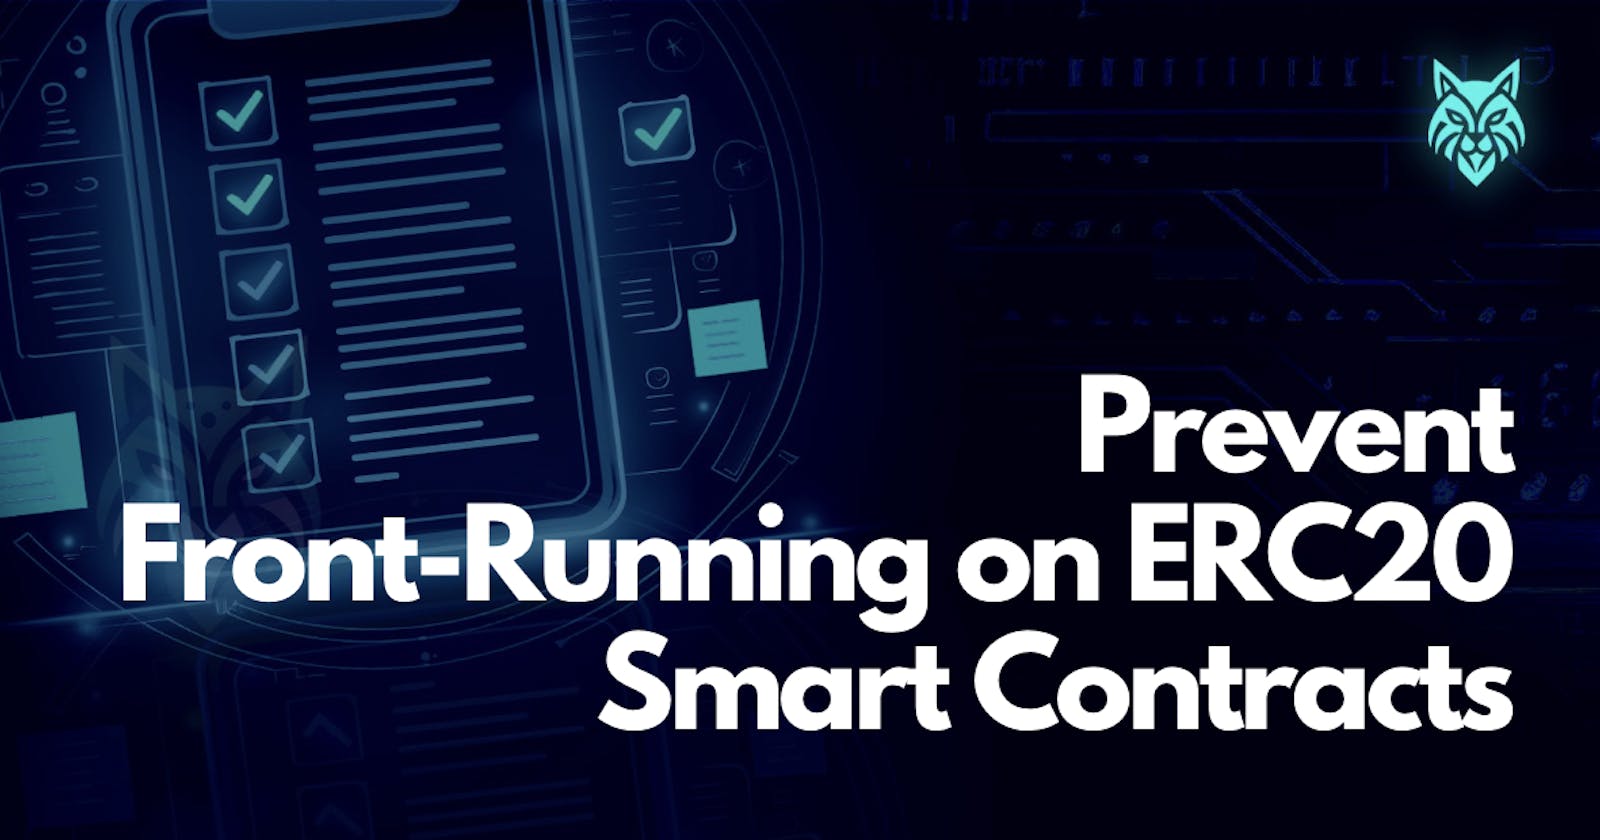 Prevent Front-Running on ERC20 Smart Contracts